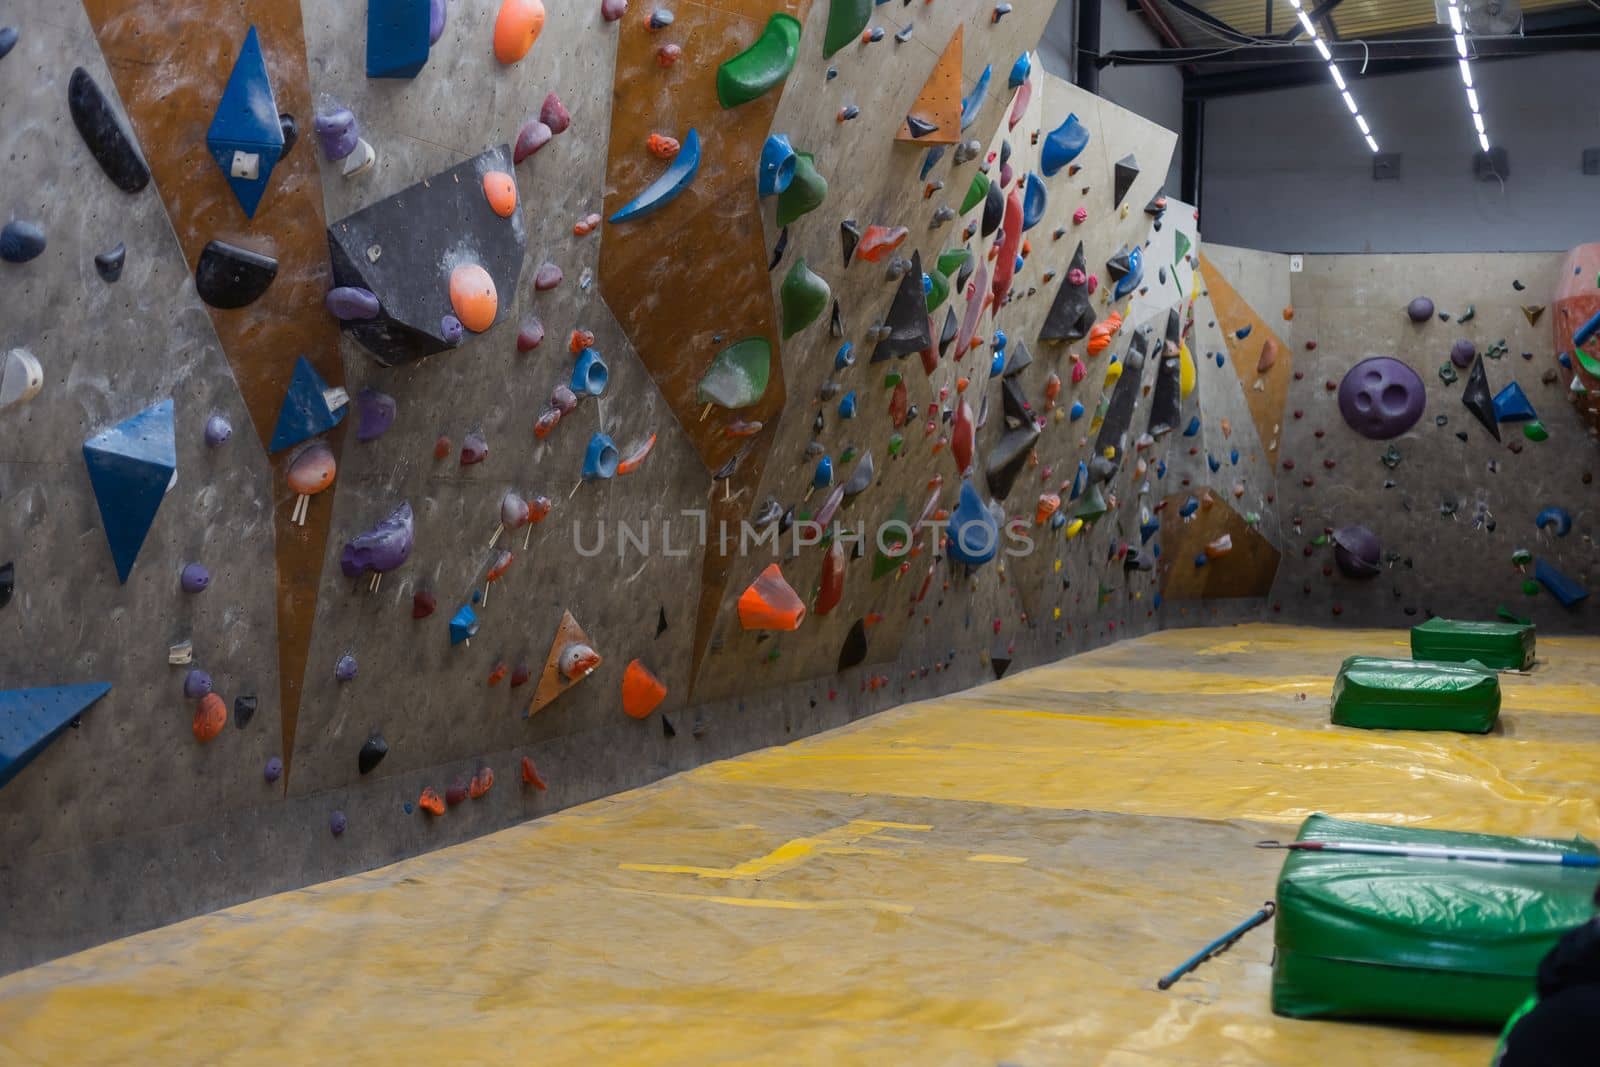 wall climbing wall, with protrusions, ropes and carbines.